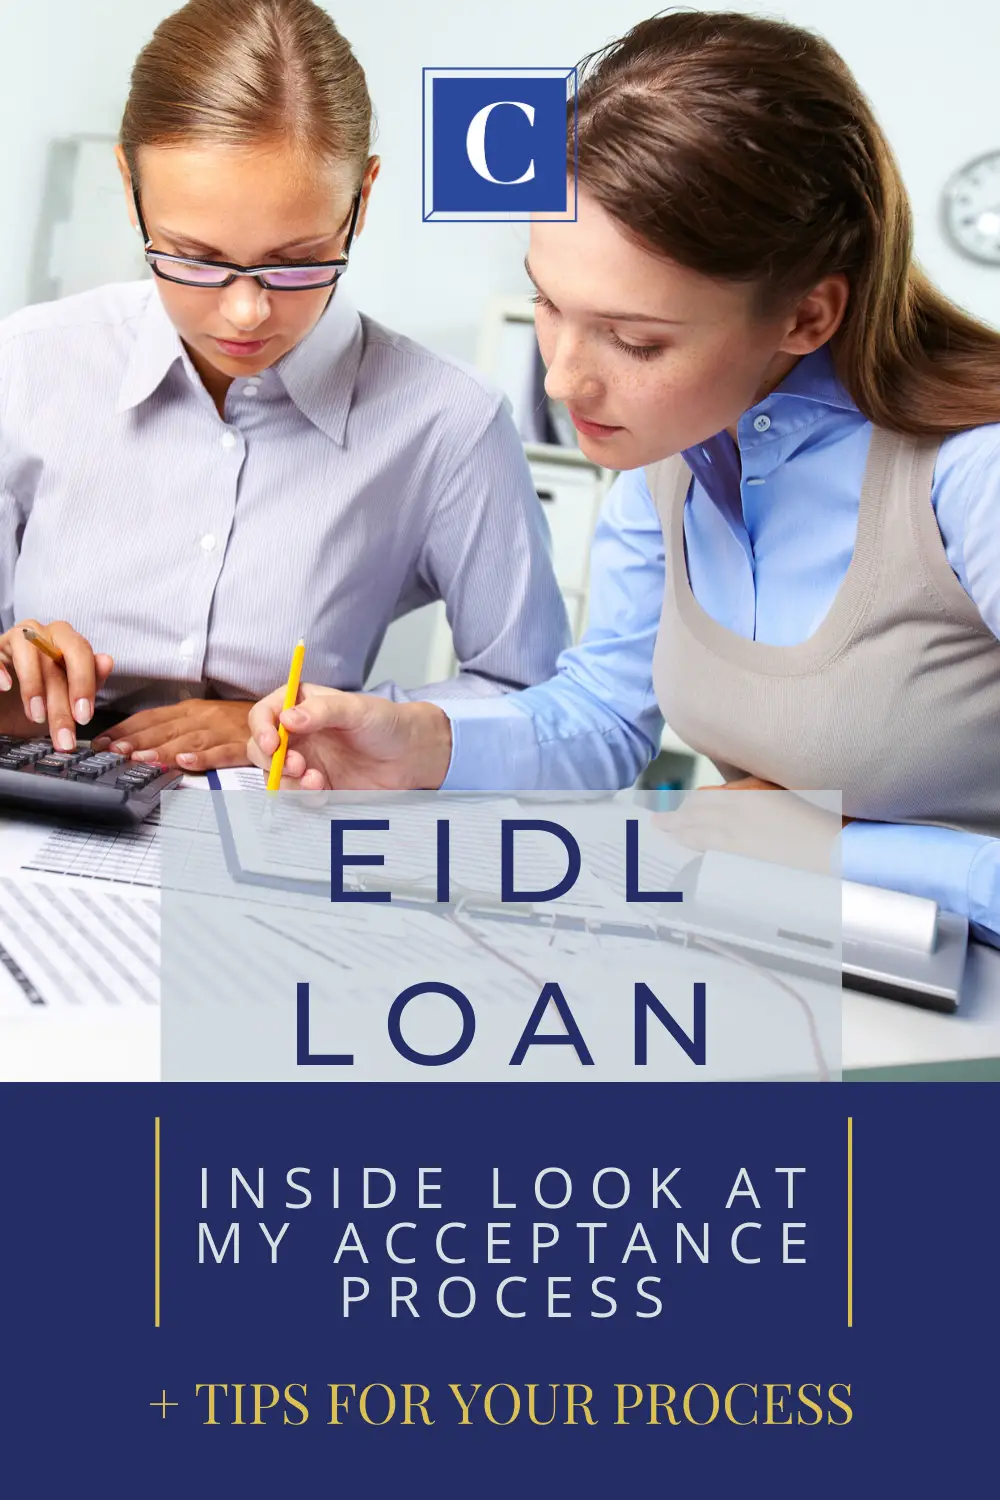 How Do You Apply For A Eidl Loan